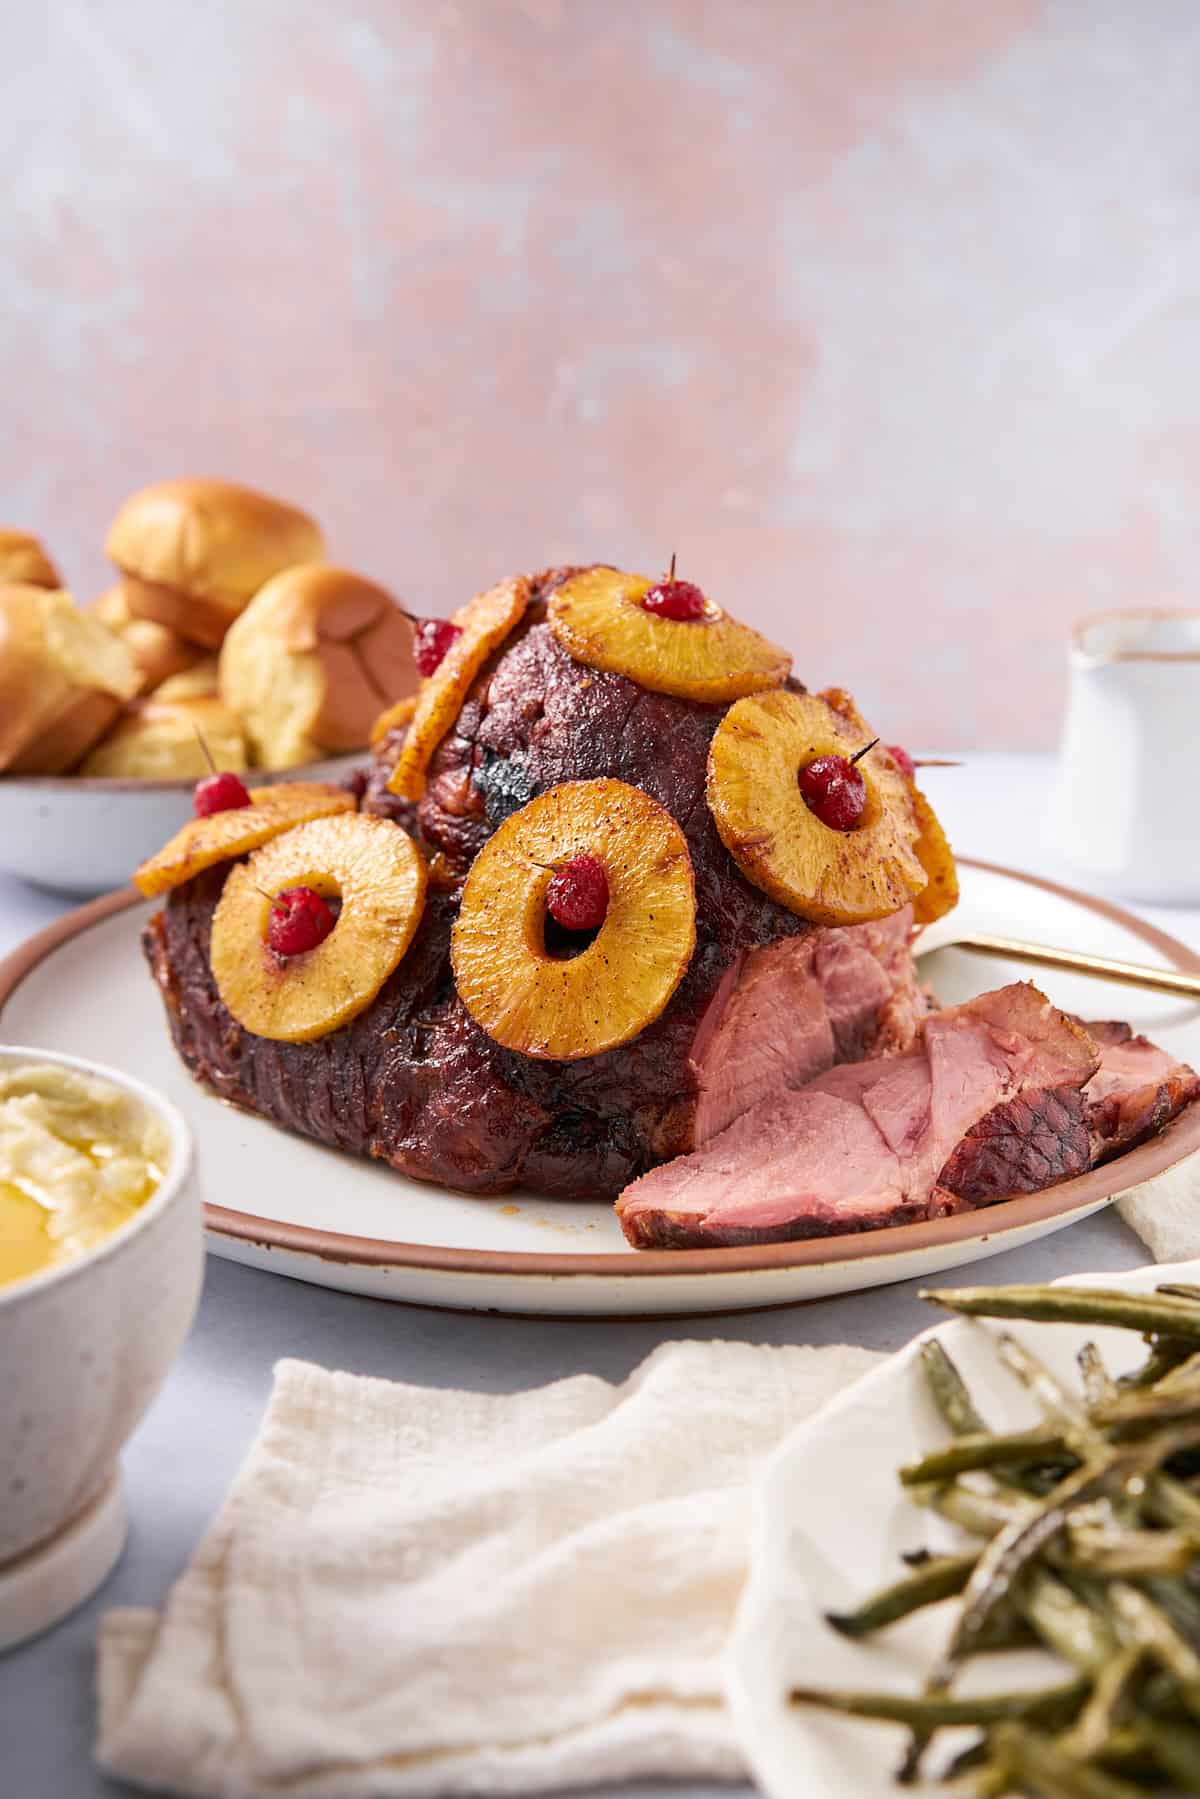 pineapple honey glazed ham with maraschino cherries, surrounded by rolls, and other sides.